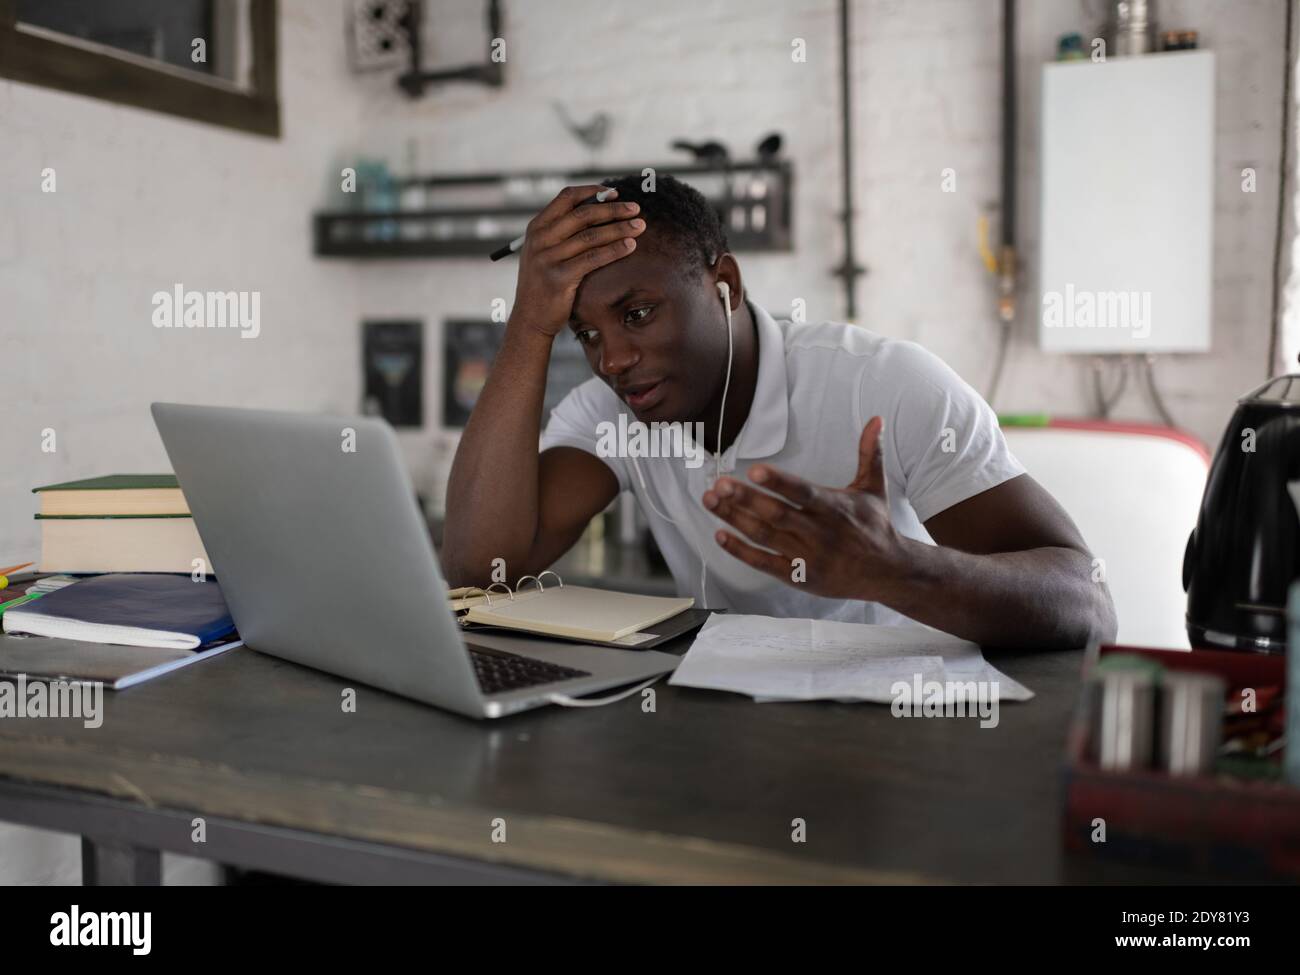 African American man facepalming in frustration while sitting at kitchen table and discussing assignment with classmates during remote lesson at home Stock Photo